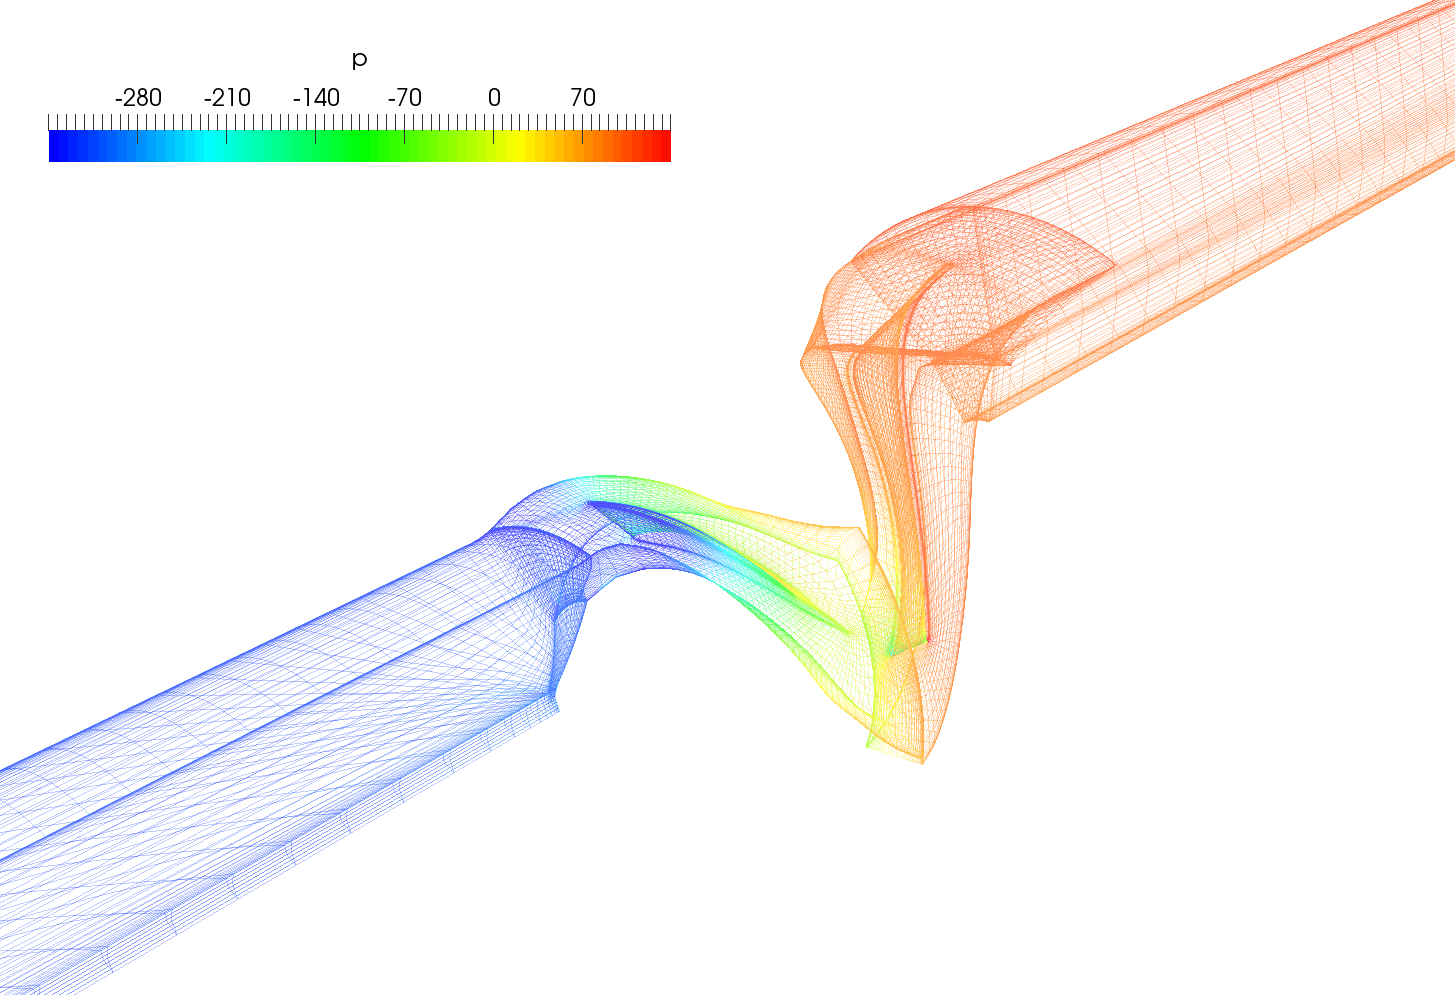 Axial Pump Turbomachinery CFD Mesh Pressure